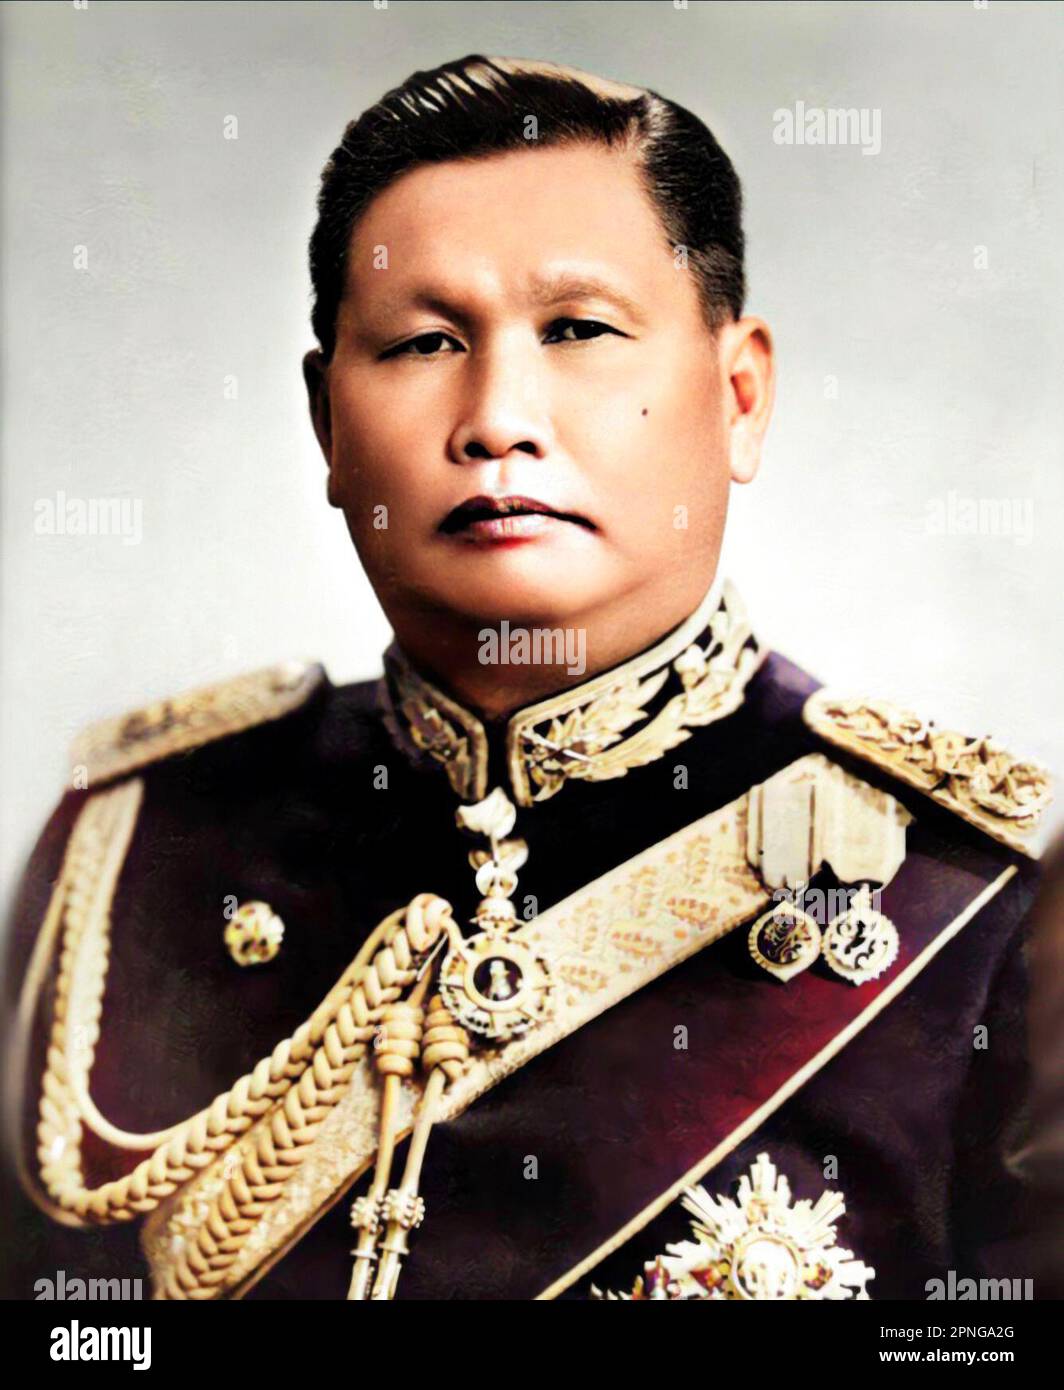 Thailand: Field Marshal Sarit Thanarat (June 16, 1908 – December 8, 1963), Prime Minister of Thailand 1959 - 1963. Sarit Thanarat was a Thai career soldier who staged a coup in 1957, thereafter serving as Thailand's Prime Minister until his death in 1963.  Sarit's regime was the most repressive and authoritarian in modern Thai history, abrogating the constitution, dissolving parliament, and vesting all power in his newly-formed Revolutionary Party. Sarit banned all other political parties, imposing very strict censorship of the press after the coup. Stock Photo